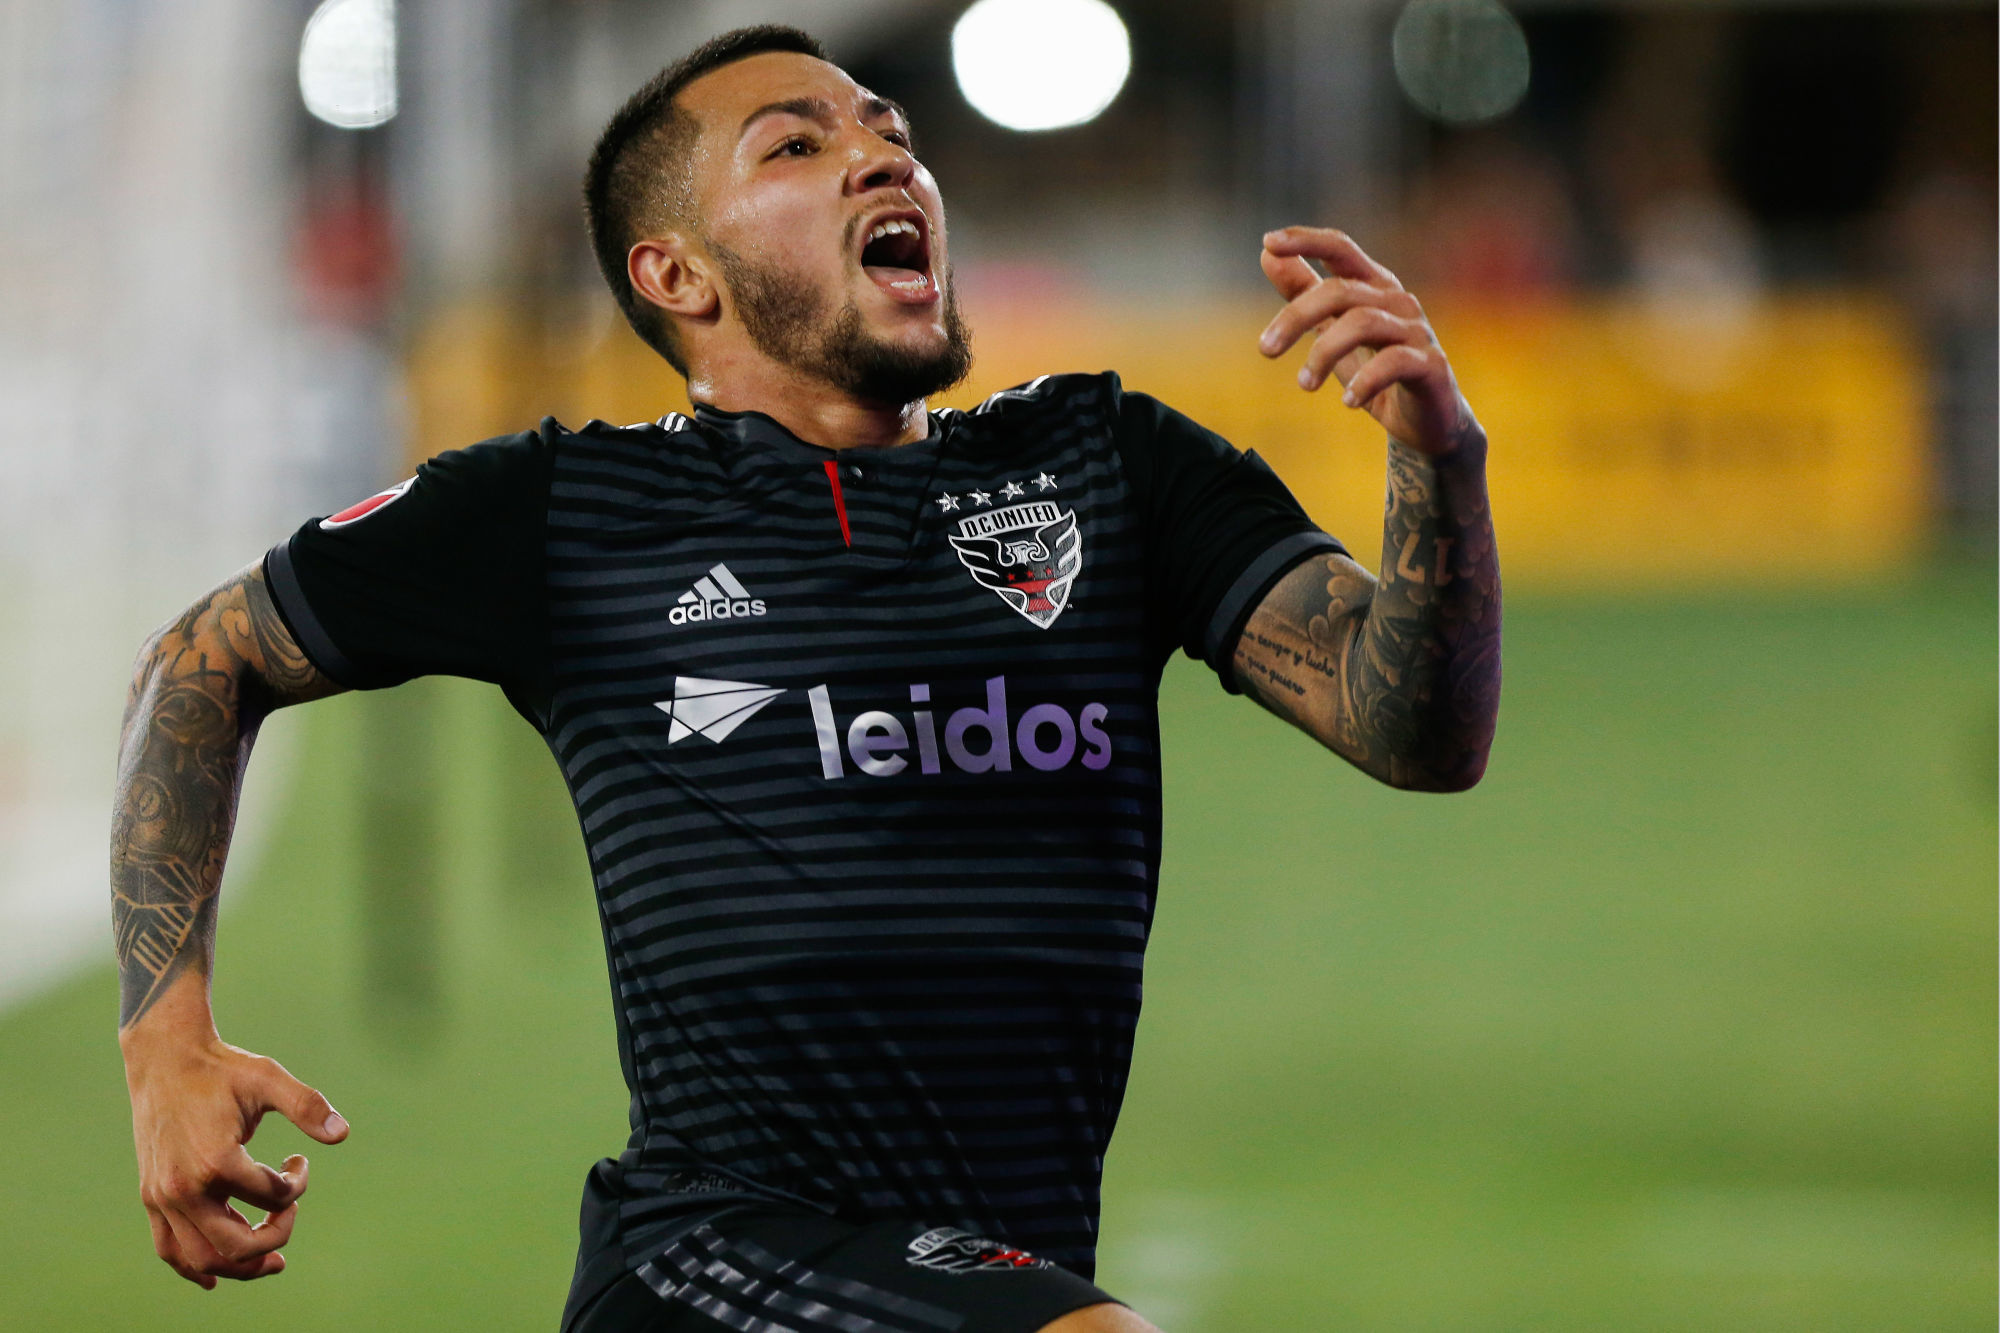 May 29, 2019; Washington, DC, USA; D.C. United midfielder Luciano Acosta (10) celebrates after scoring a goal against Chicago Fire in the second half at Audi Field. The game finished a 3-3 tie. Photo : SUSA / Icon Sport